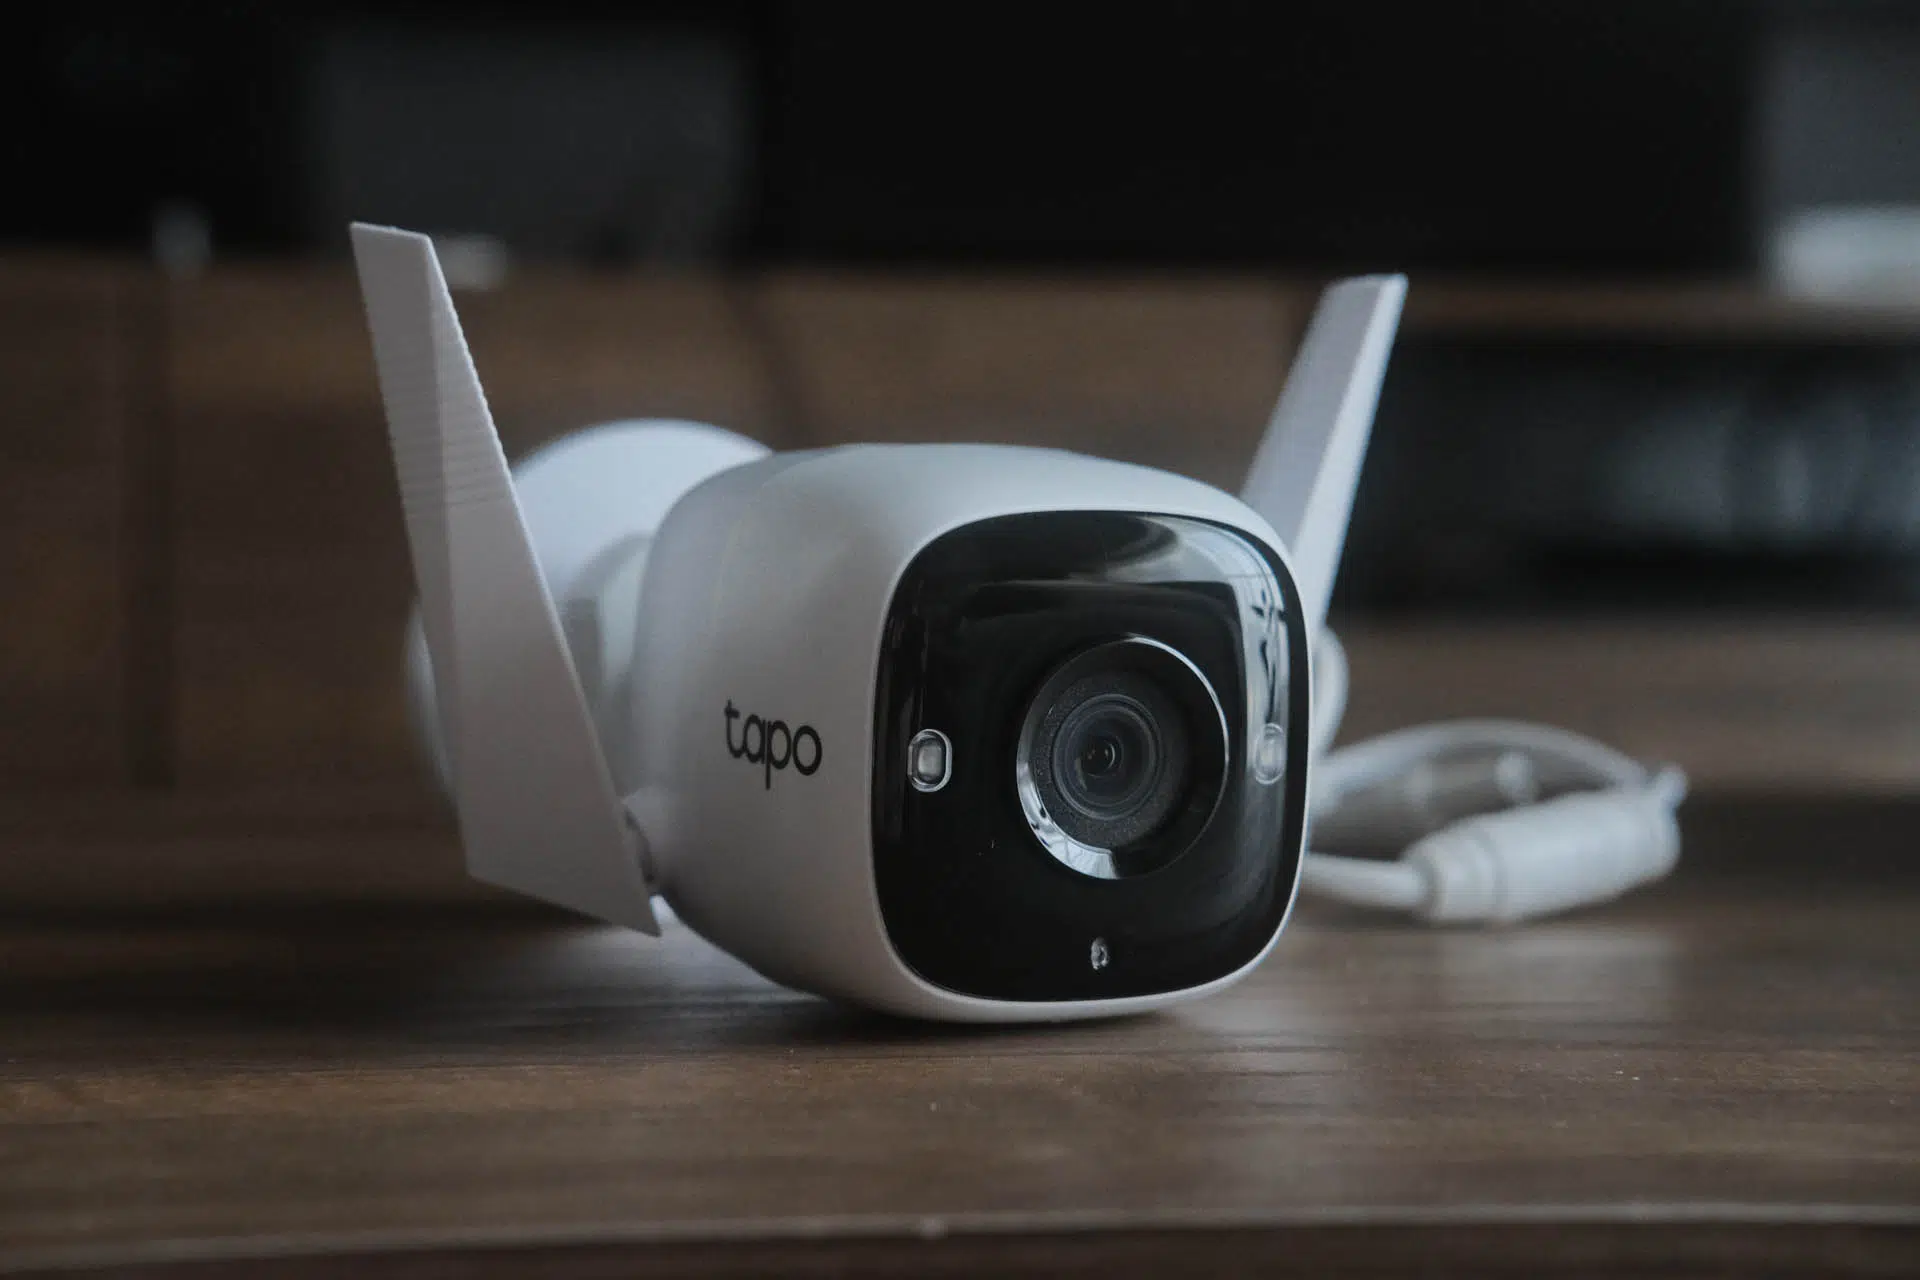 TP-Link Tapo C310 Review - Affordable Wi-Fi Security Camera